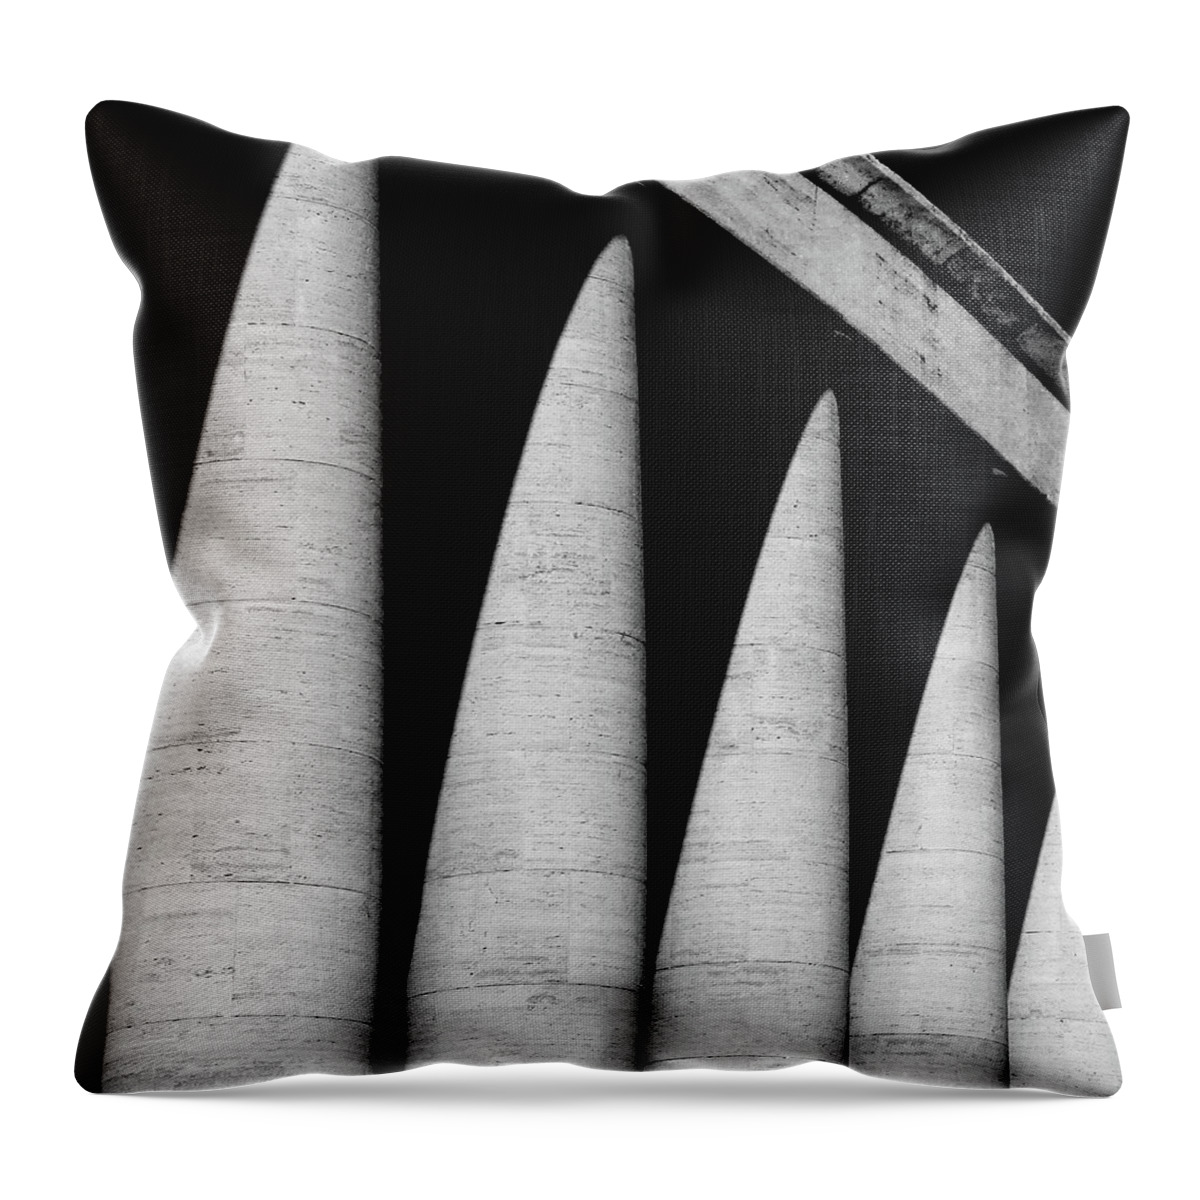 Shadow Throw Pillow featuring the photograph Row Of Pillars by Photo By Daniela Nobili